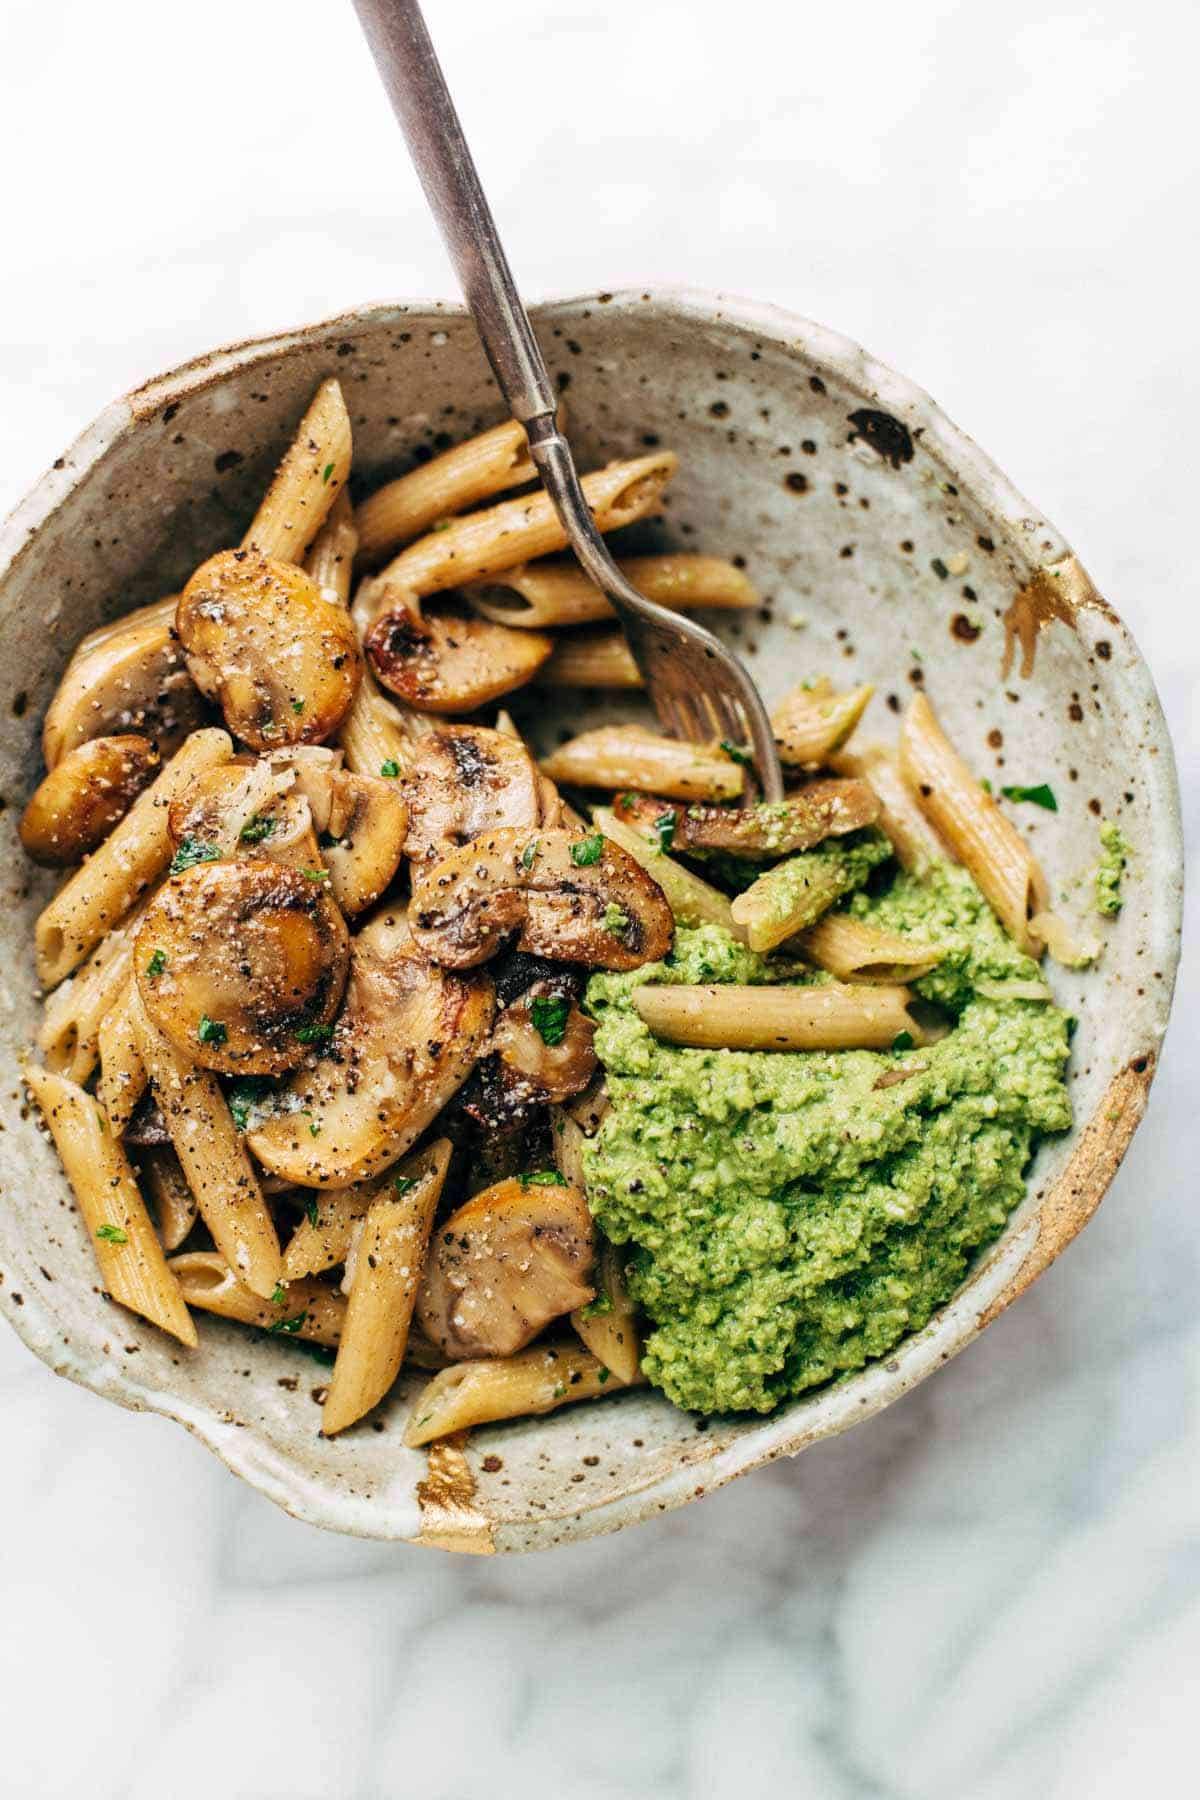 Simple Mushroom Penne with Walnut Pesto - made with easy ingredients like Parmesan cheese, whole wheat penne, mushrooms, garlic, and butter. Vegetarian. | pinchofyum.com